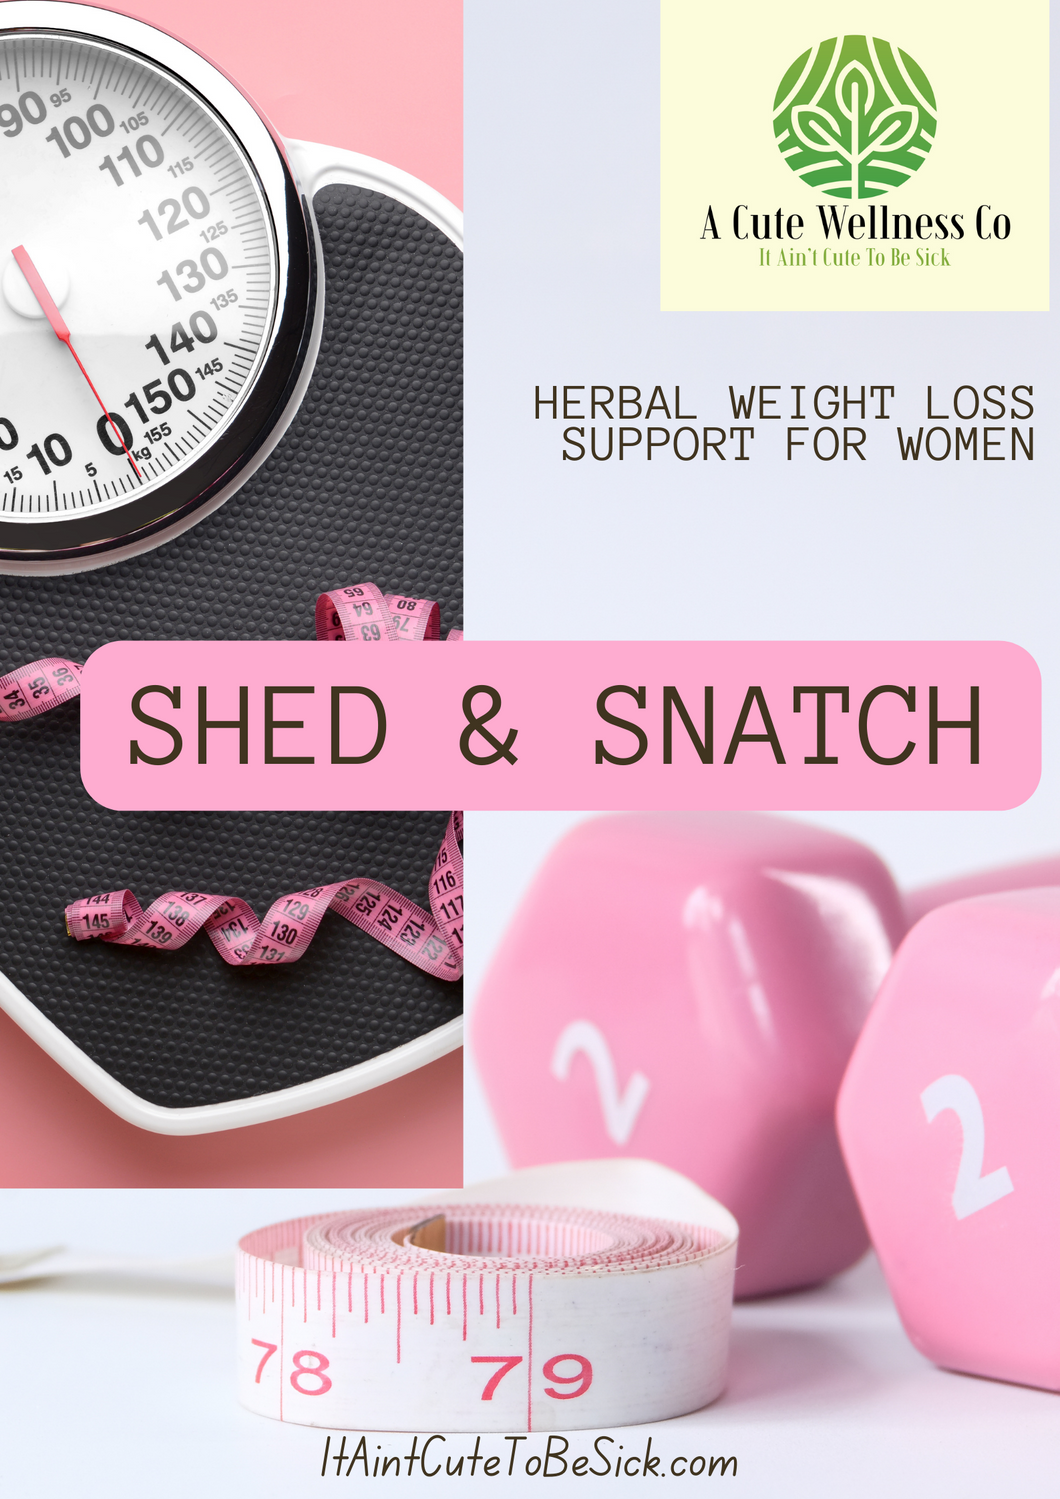 SHED & SNATCH: HERBAL WEIGHT LOSS SUPPORT